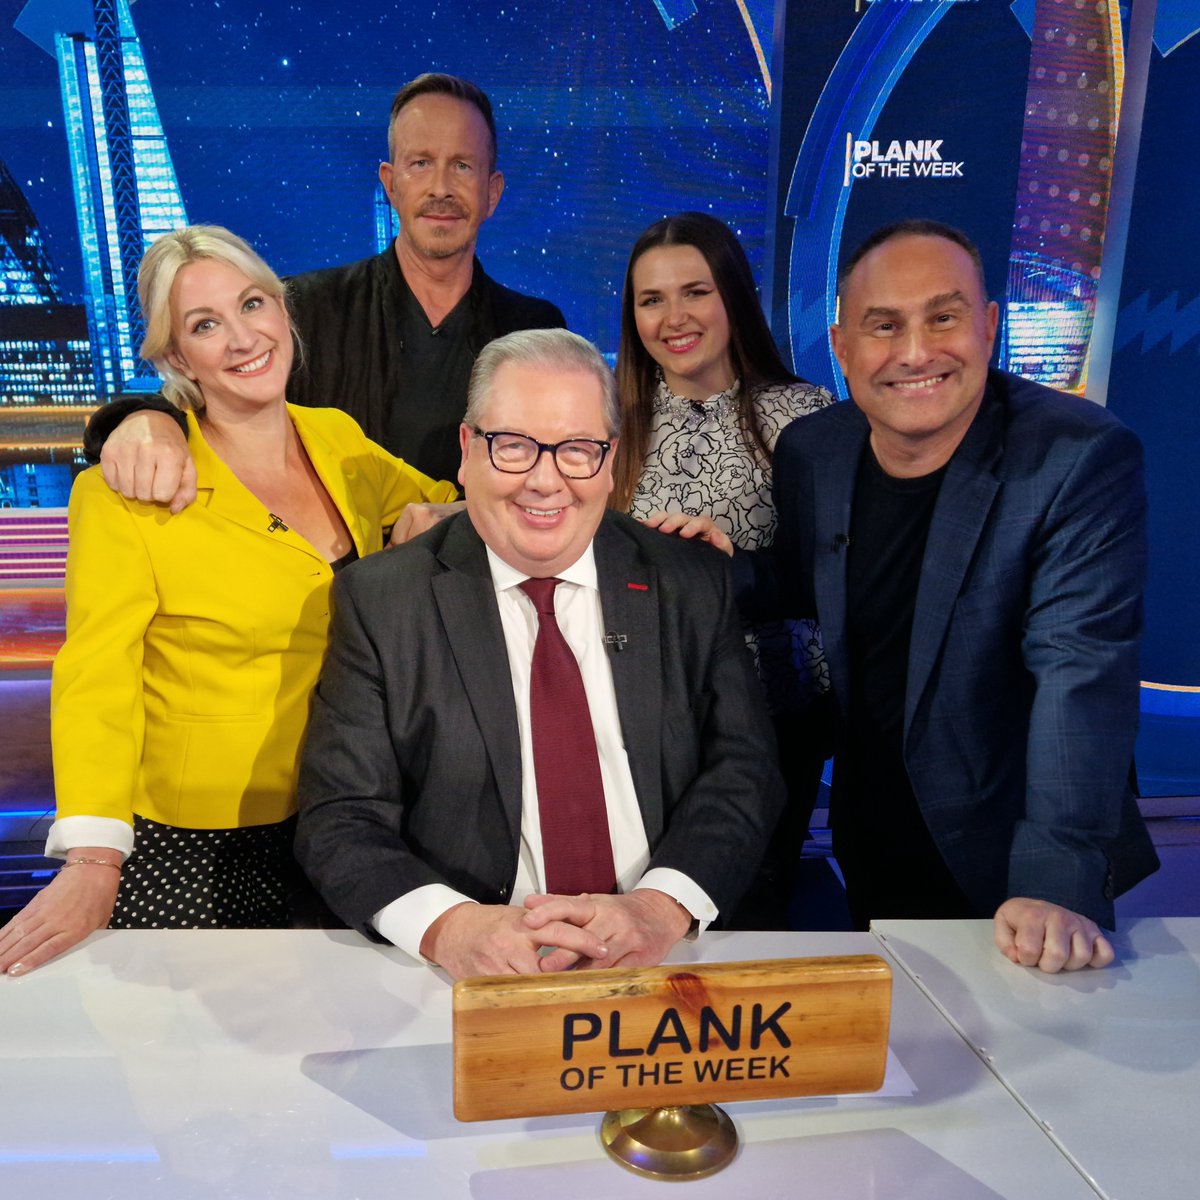 Plank Of The Week is back on YouTube! Mike Graham picks the Planks with Alex Phillips, Will Geddes, Chloe Dobbs and Steve Denyer. 📺 Watch now: youtu.be/Ejj7FwNTtv8 @Iromg @ThatAlexWoman @willgeddes @DobbsandPolicy @steve_denyer